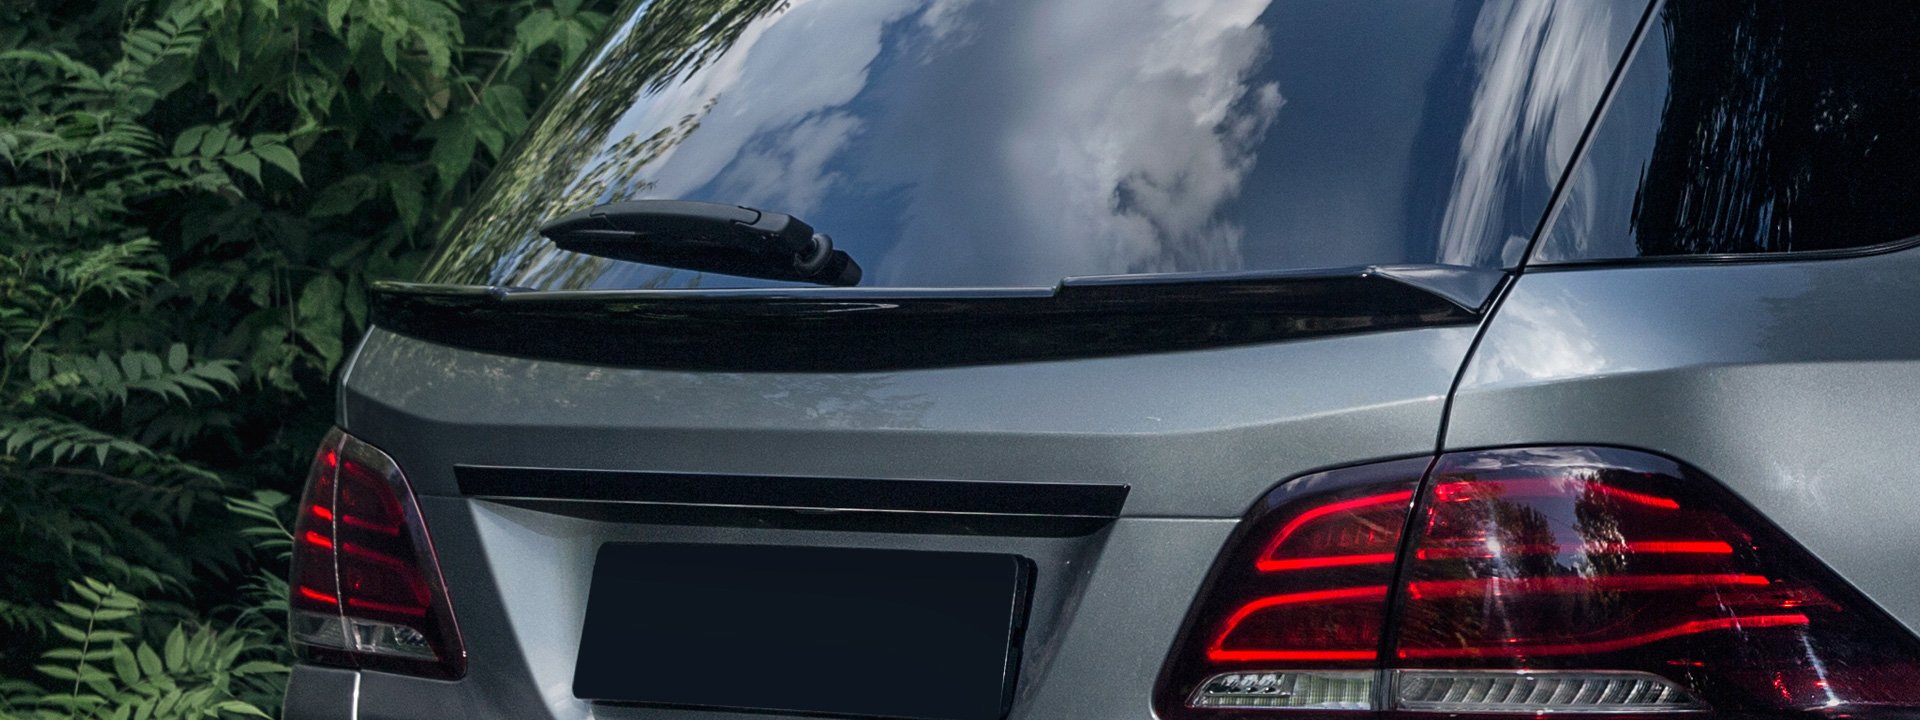 Spoiler for Mercedes-Benz GLE W166